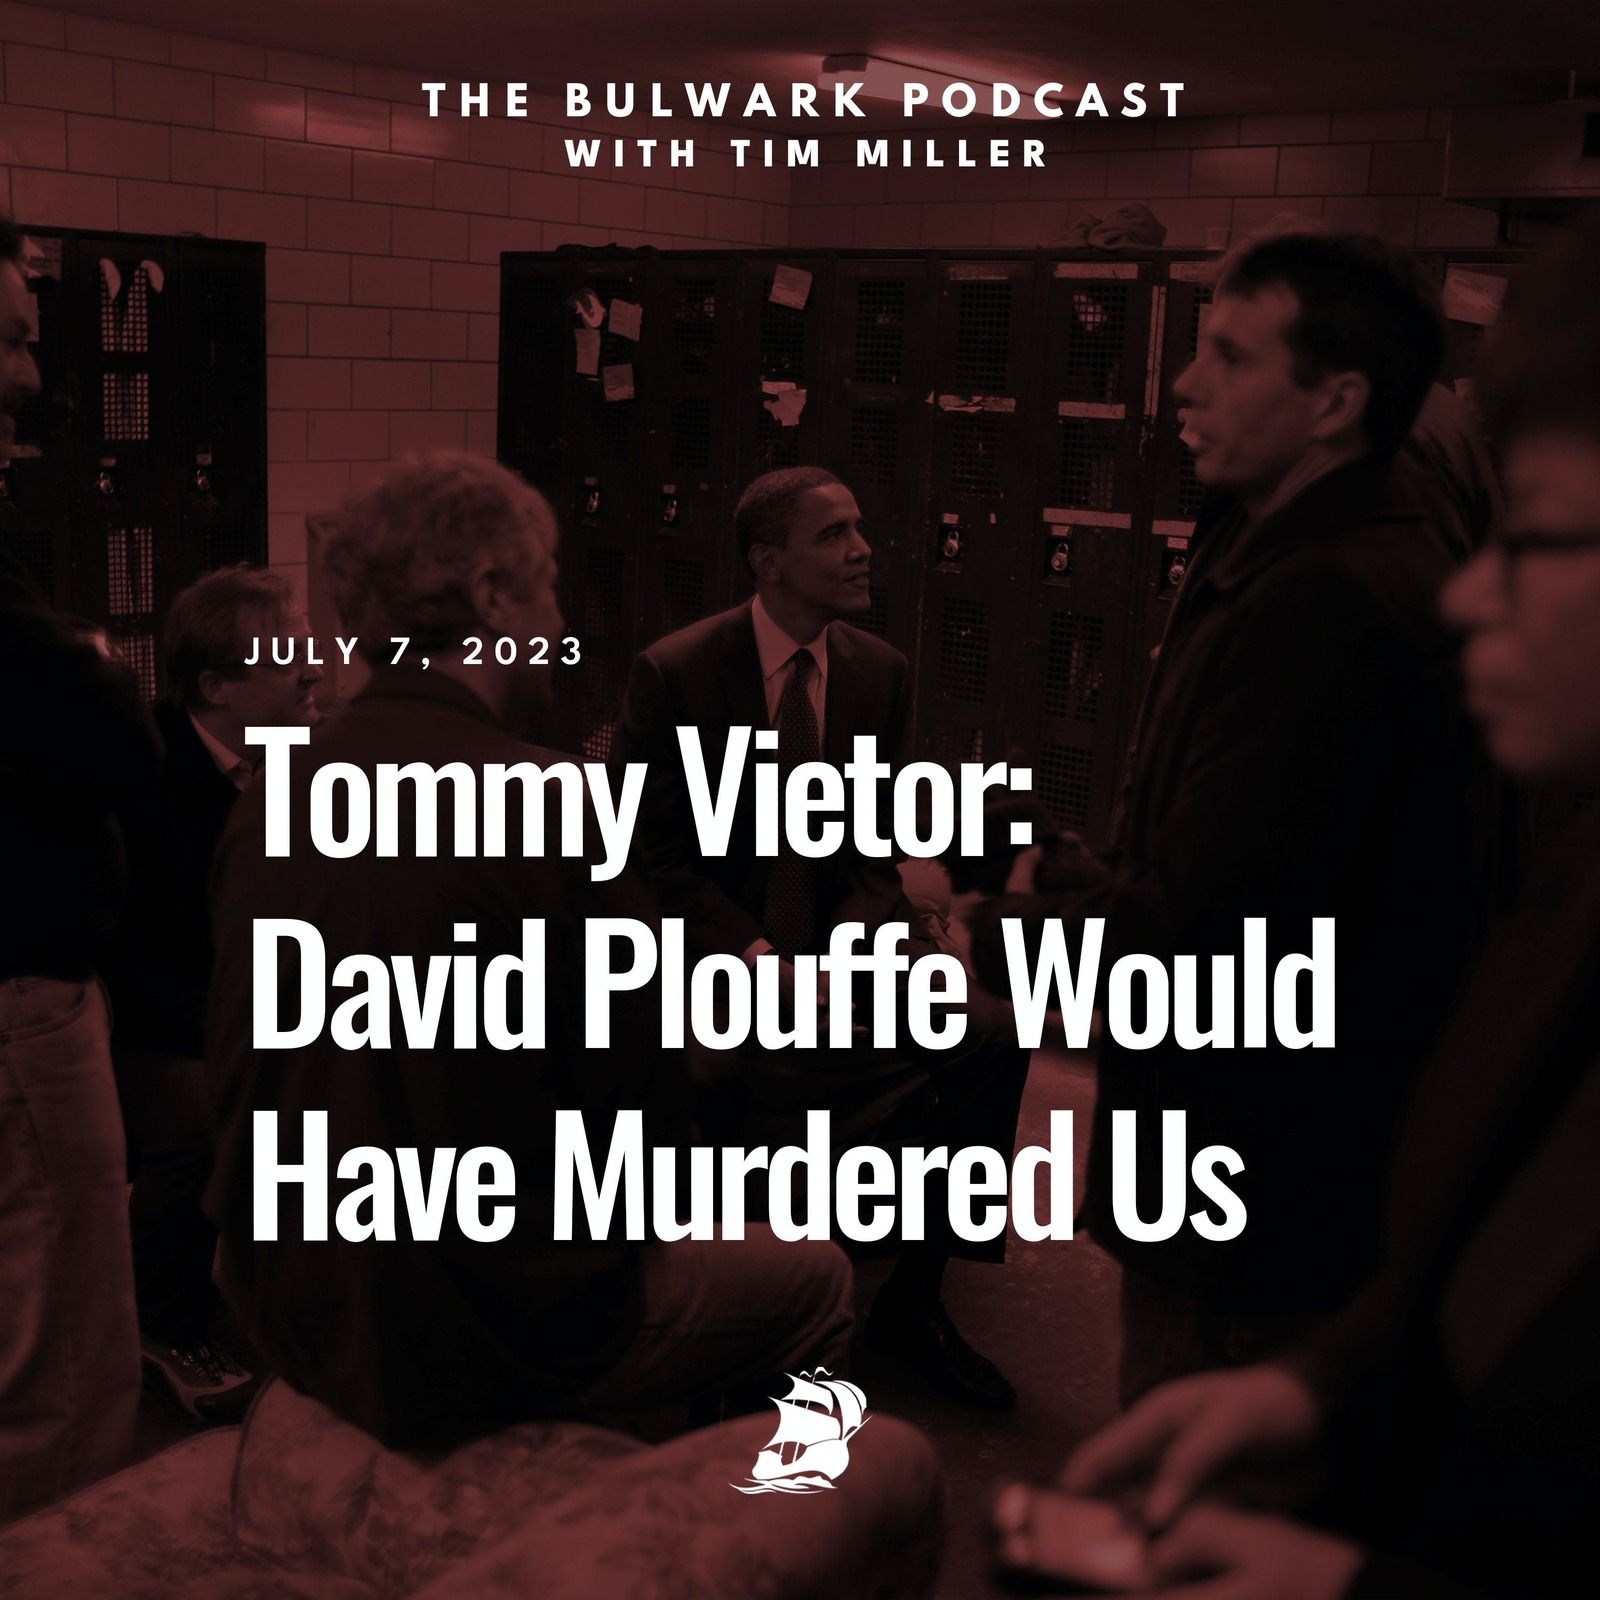 Tommy Vietor: David Plouffe Would Have Murdered Us